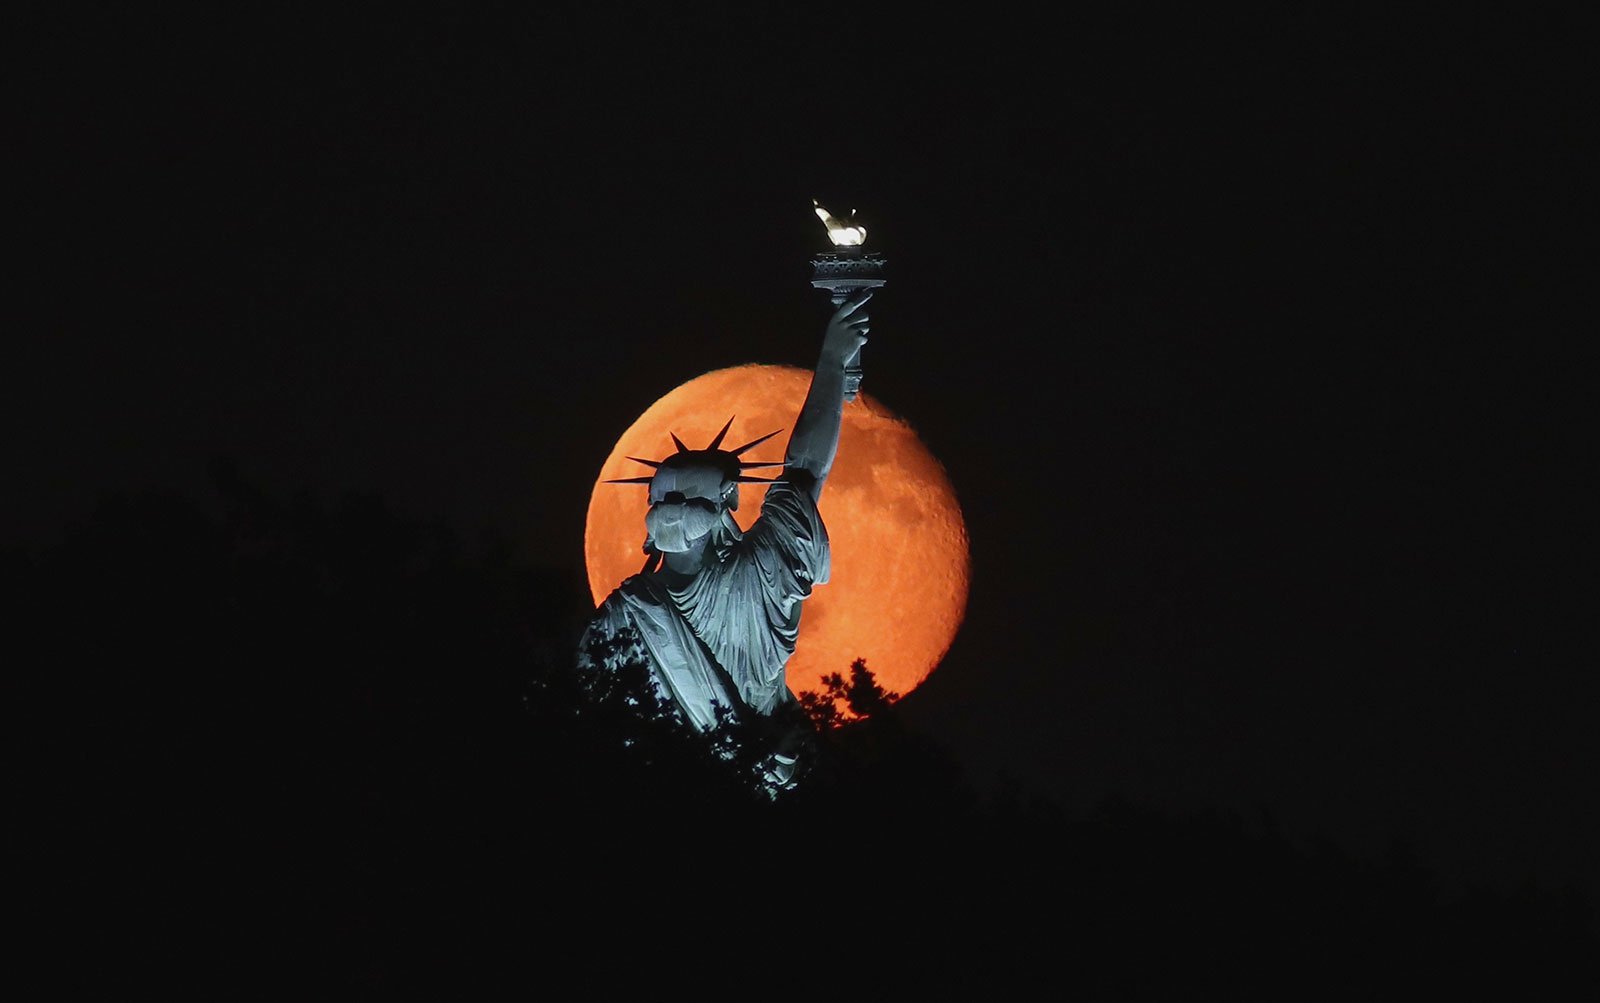 NYC Statue of Liberty in front of the supermoon